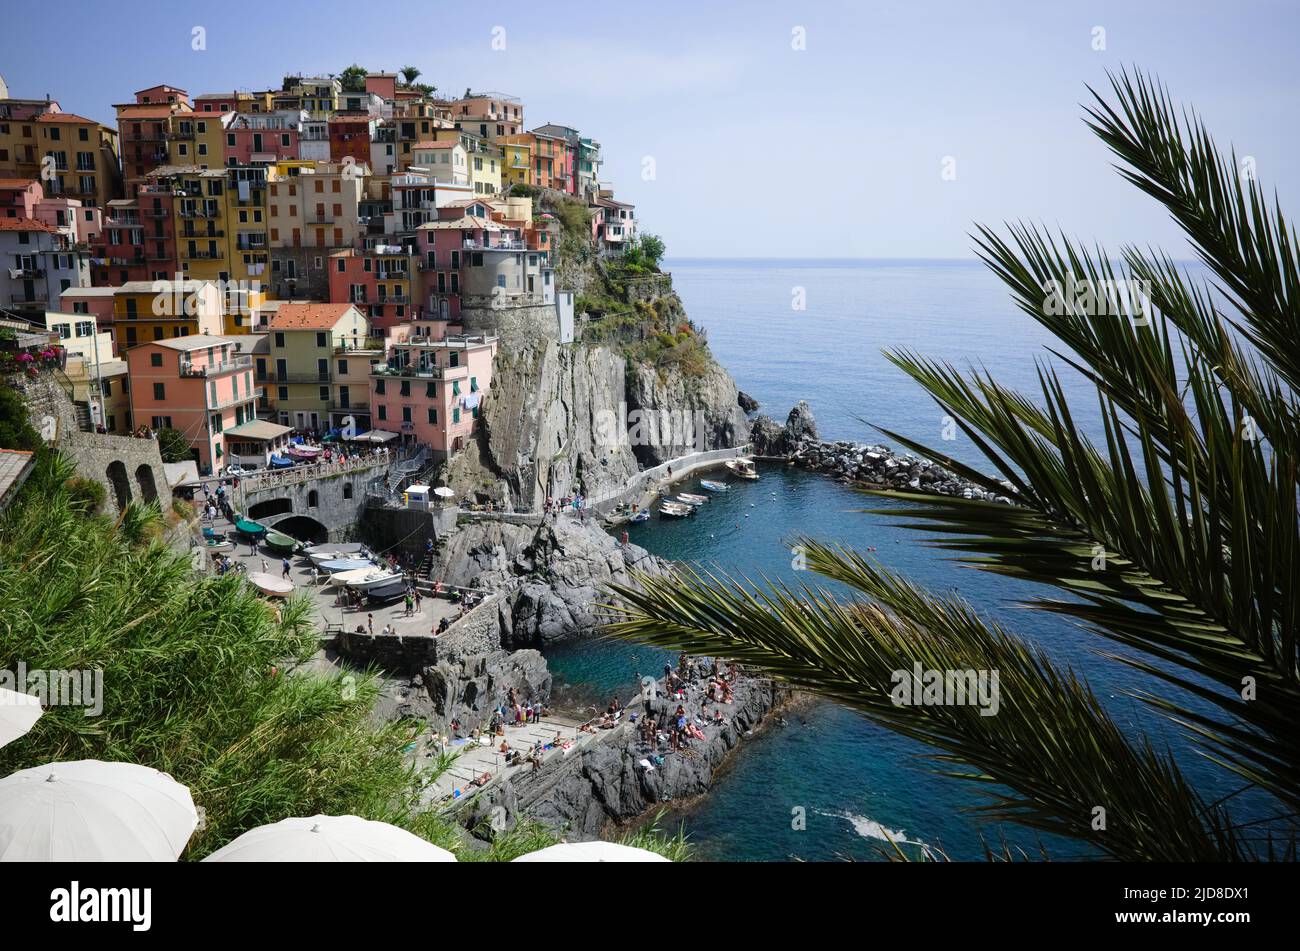 Manarola, Liguria, Italy - May, 2022: View of touristic village with typical Italian buildings in Cinque Terre National Park. Small town with colorful Stock Photo